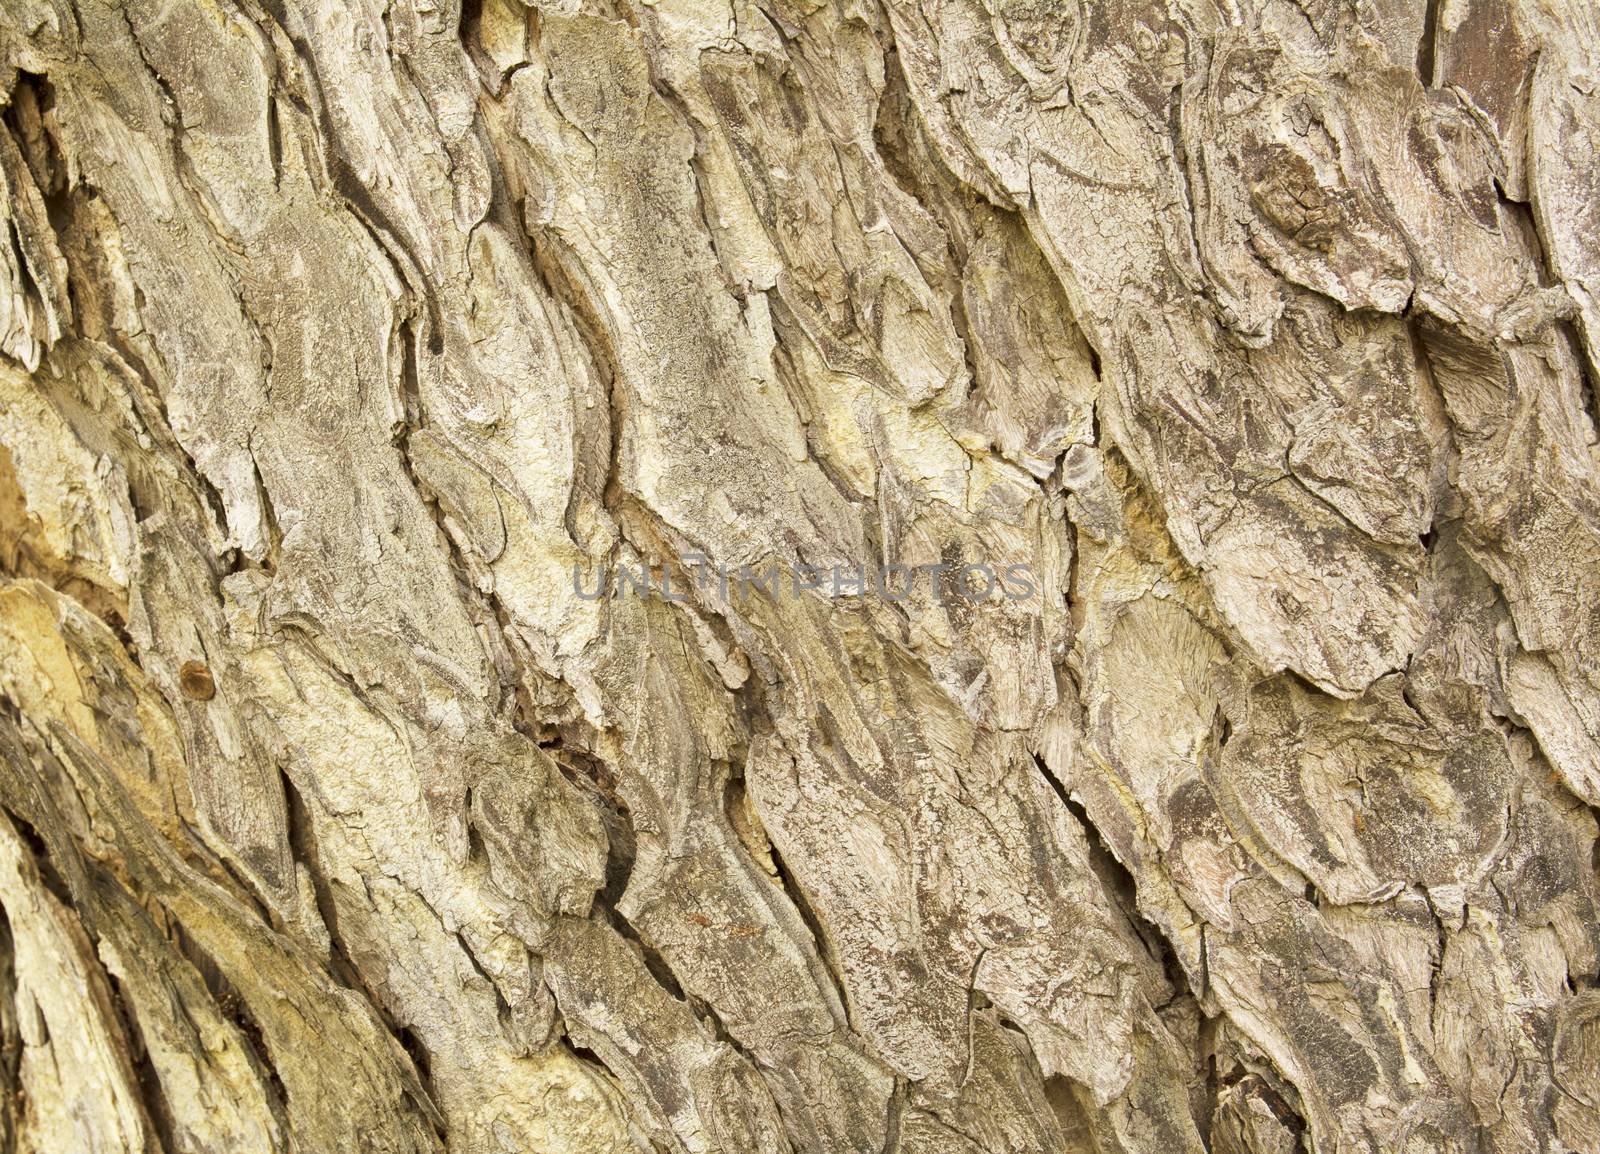 tree bark texture pattern. wood rind for background by kirisa99